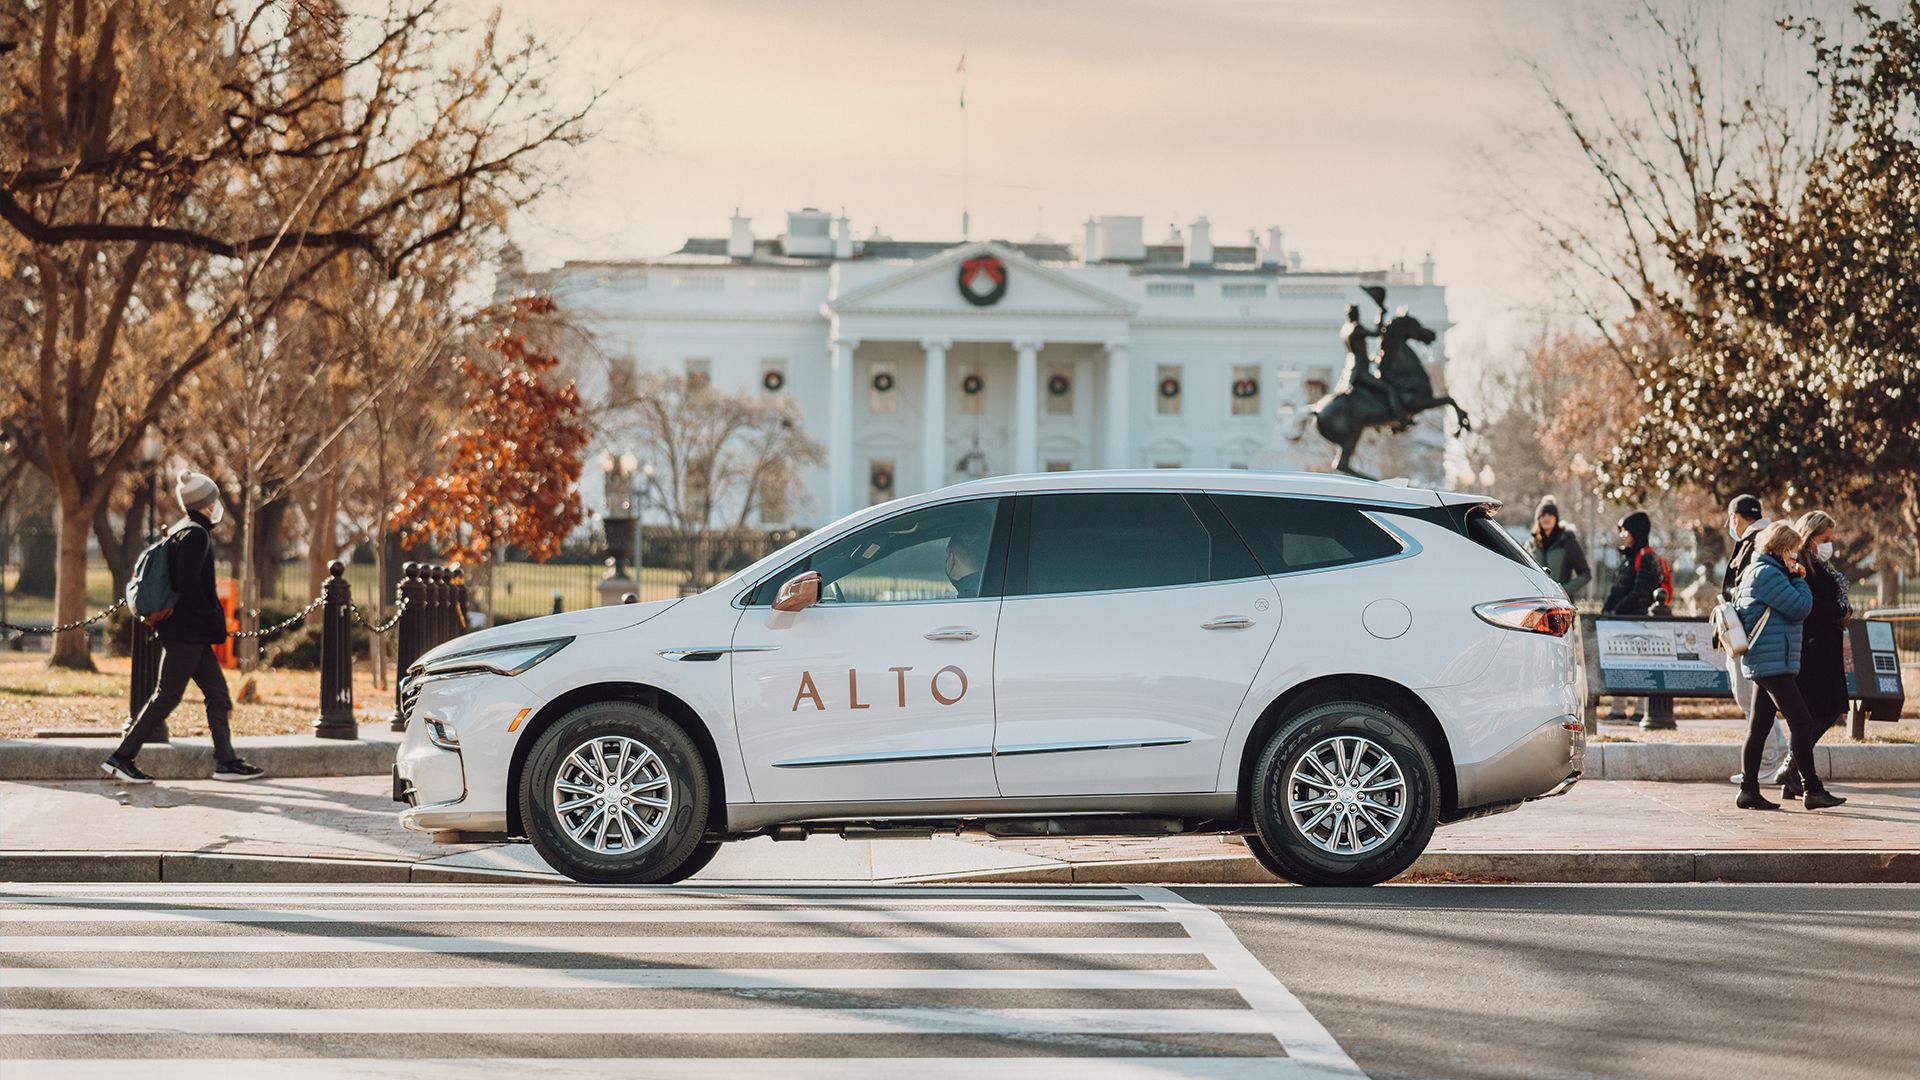 Image of a white Buick Enclave SUV with the Alto ride-hailing logo, outside the White House in Washington, D.C.